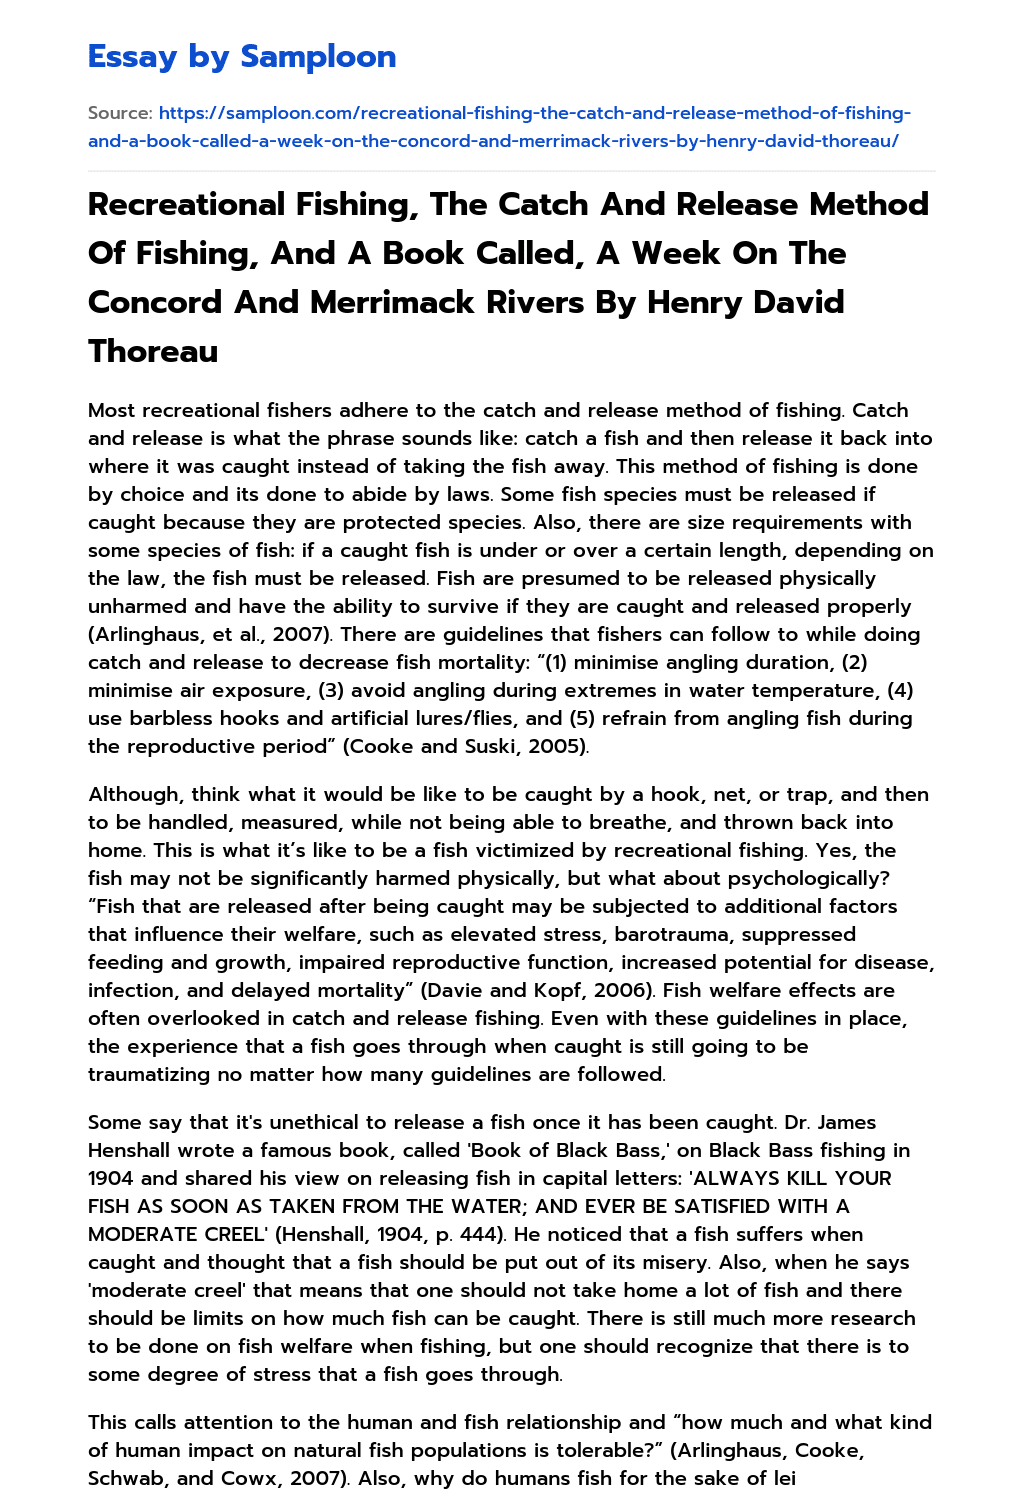 Recreational Fishing, The Catch And Release Method Of Fishing, And  A Book Called, A Week On The Concord And Merrimack Rivers By Henry David Thoreau essay